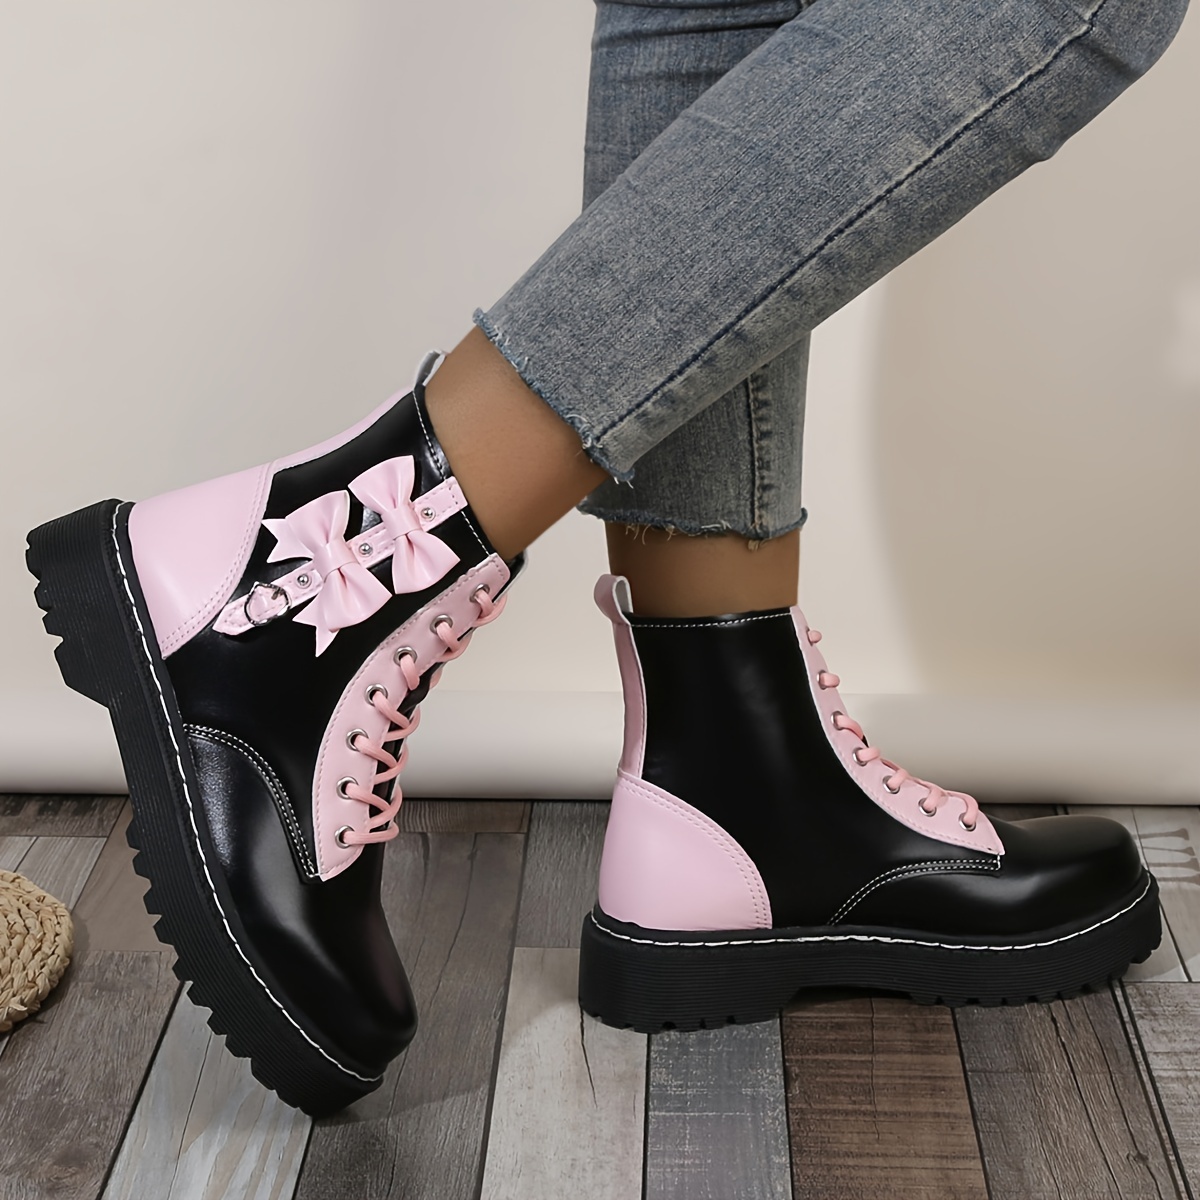 

Women's Fashionable Comfort Lace-up Heart Bow-knot Casual Slip-on Chunky-heel Ankle Boots, Stylish Streetwear